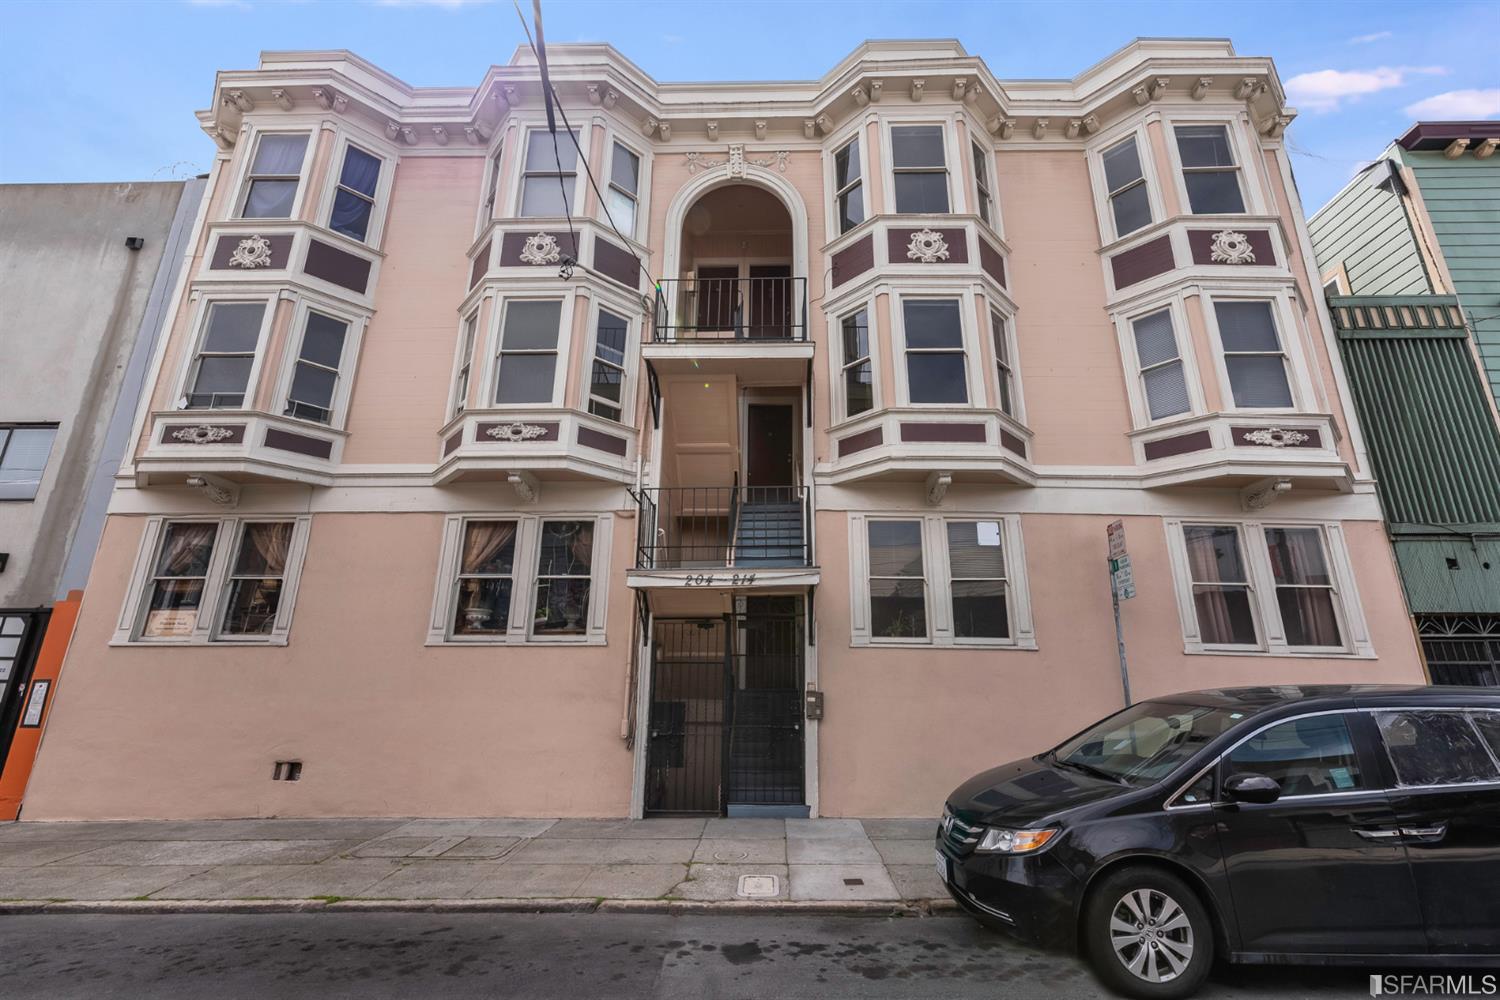 Just Sold | 204 Dore St. | SOMA | $1,750,000